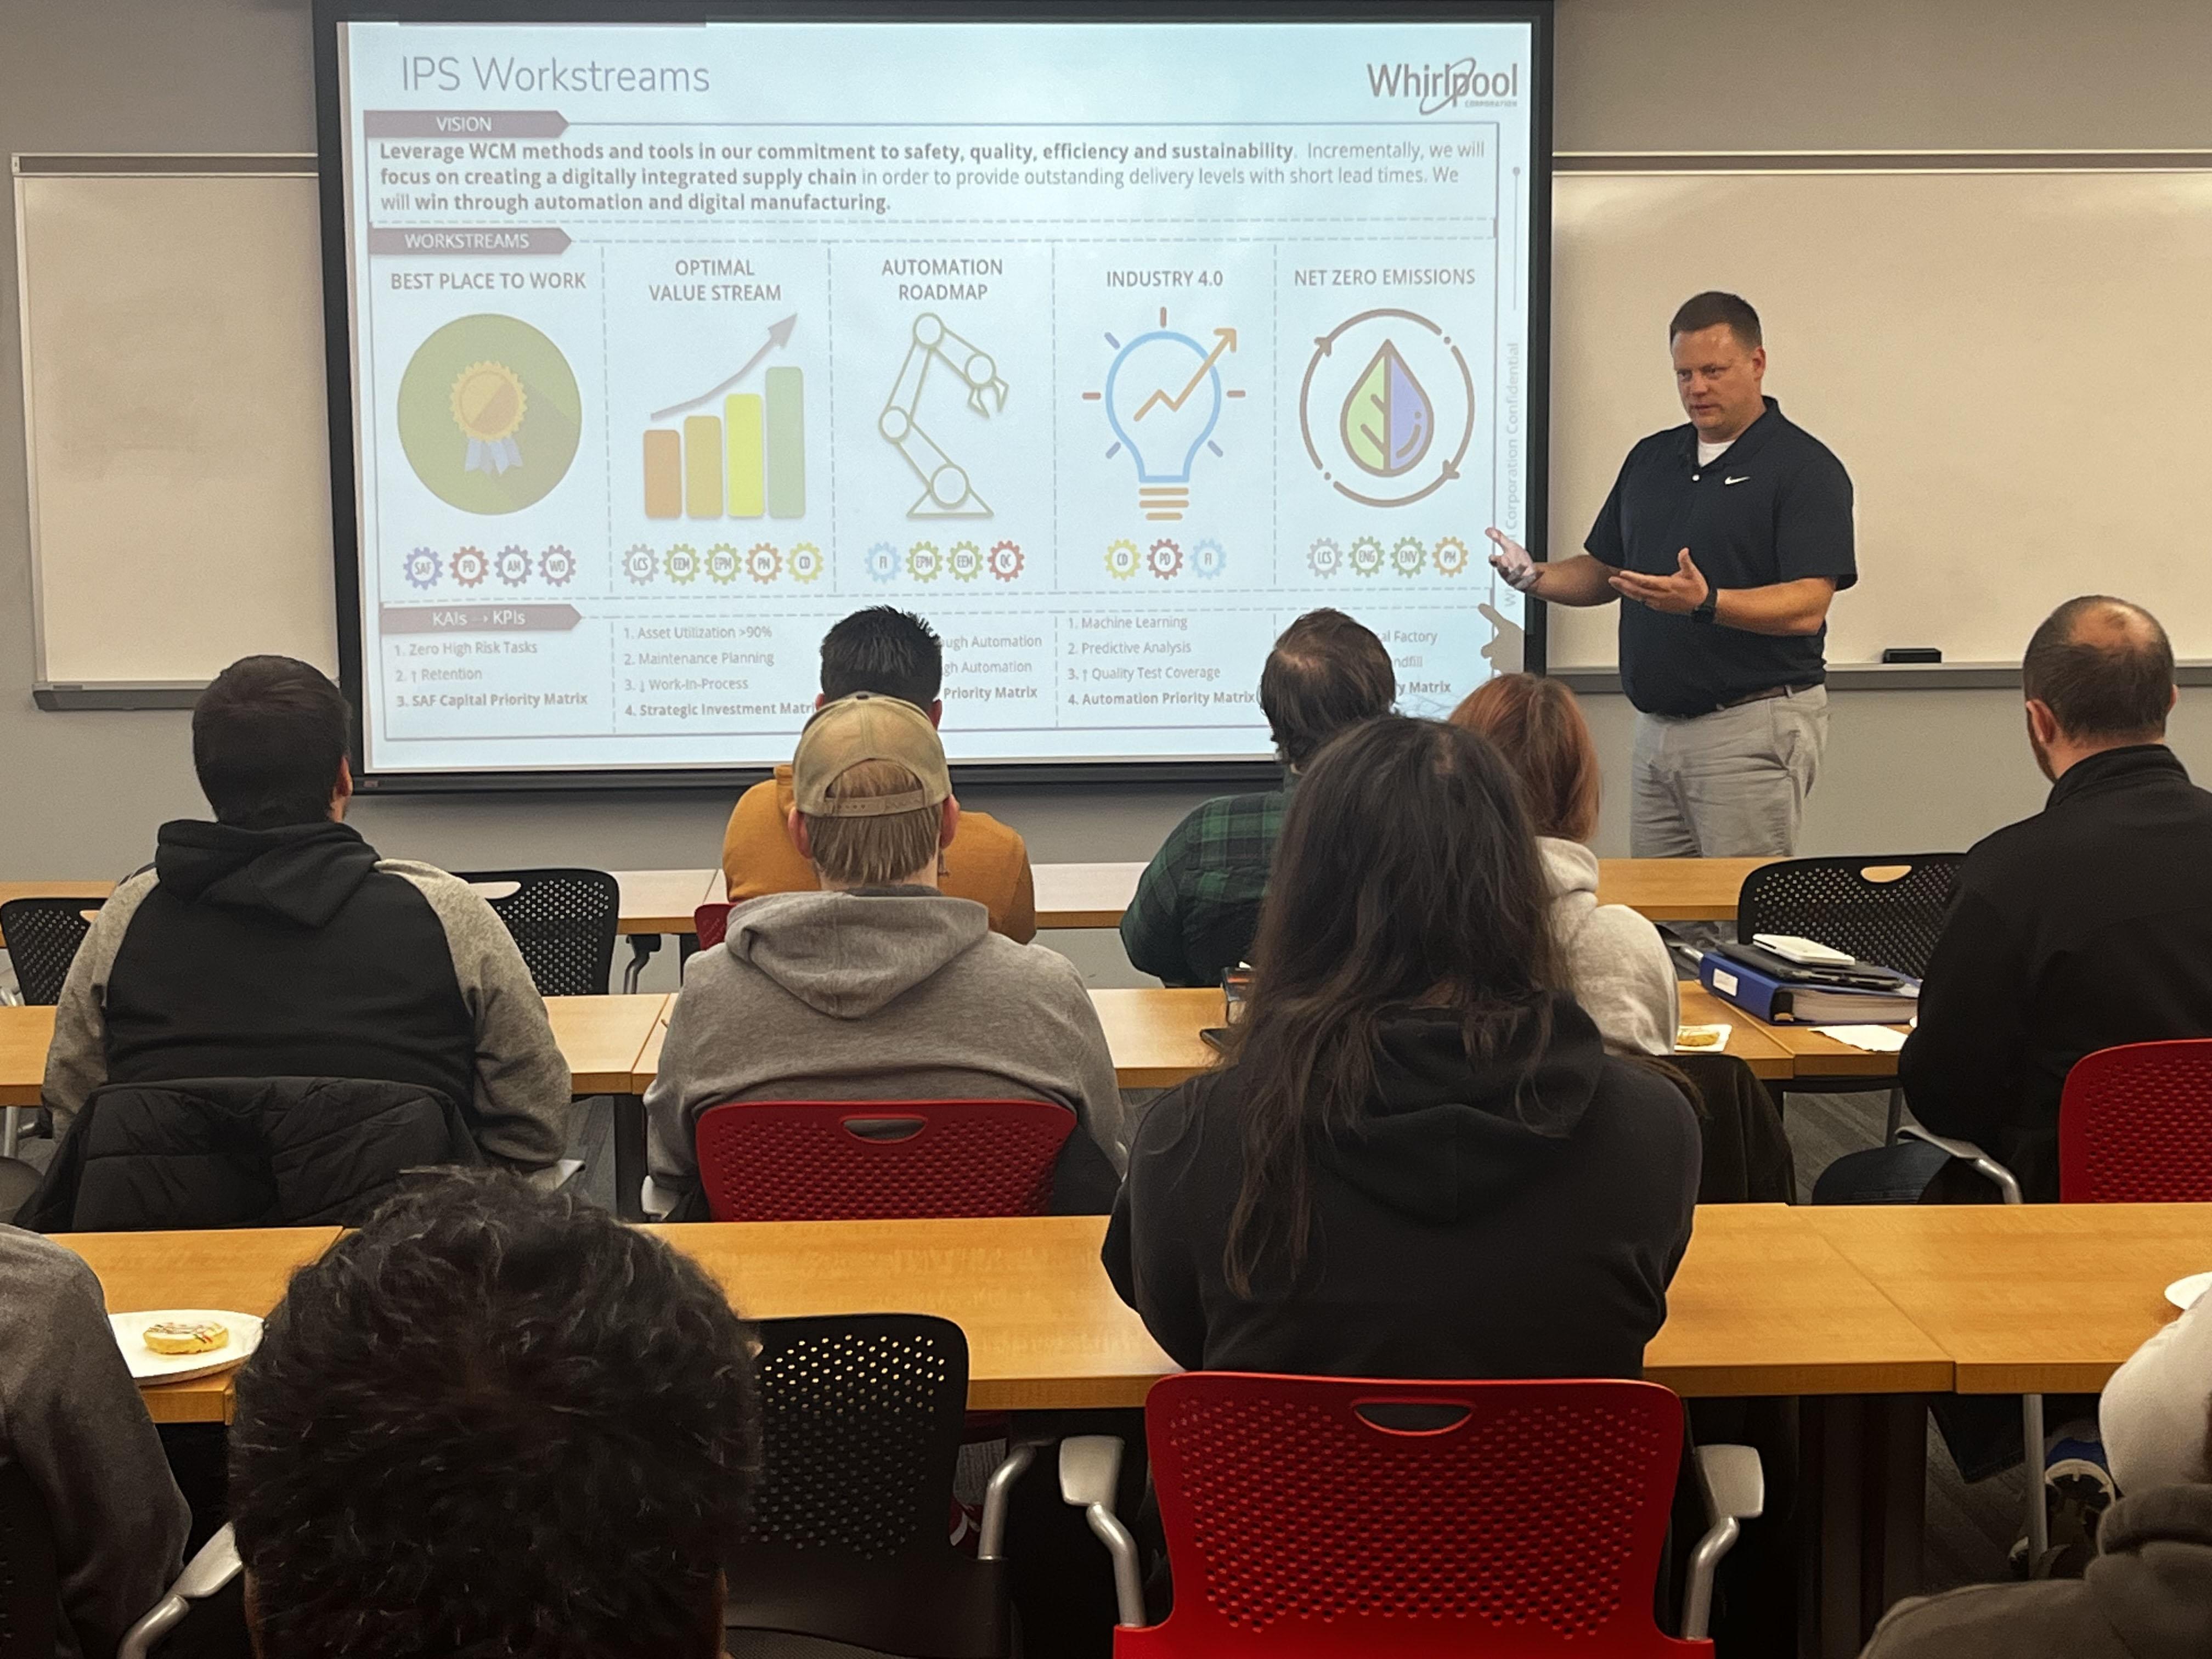 Whirlpool Marion’s Director of Engineering Ethan Ott speaking to engineering students